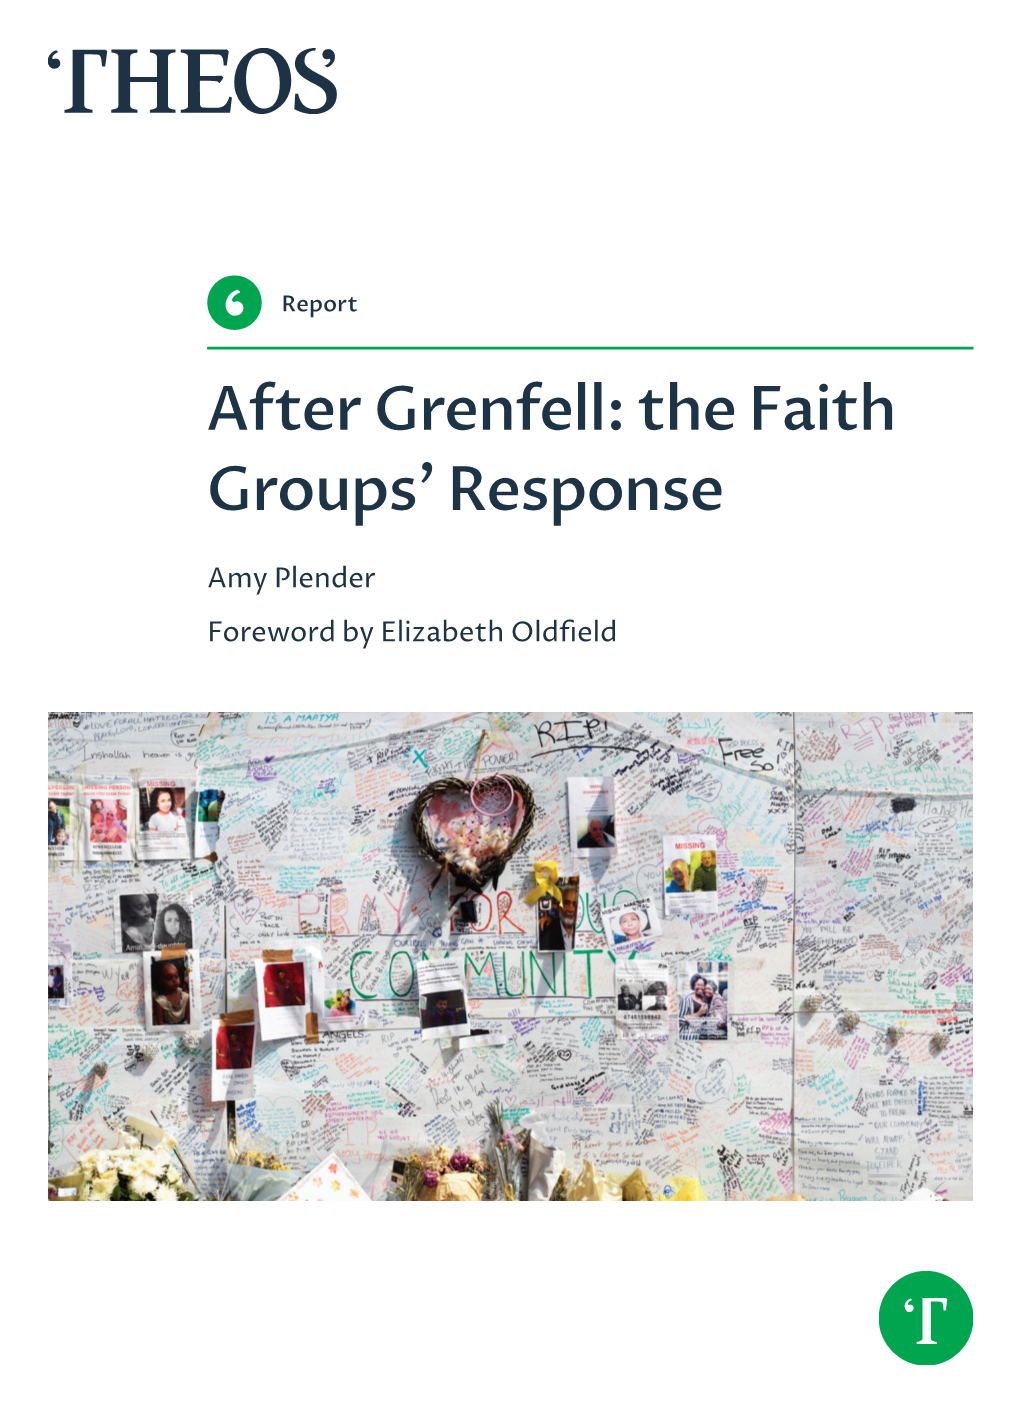 After Grenfell: the Faith Groups' Response